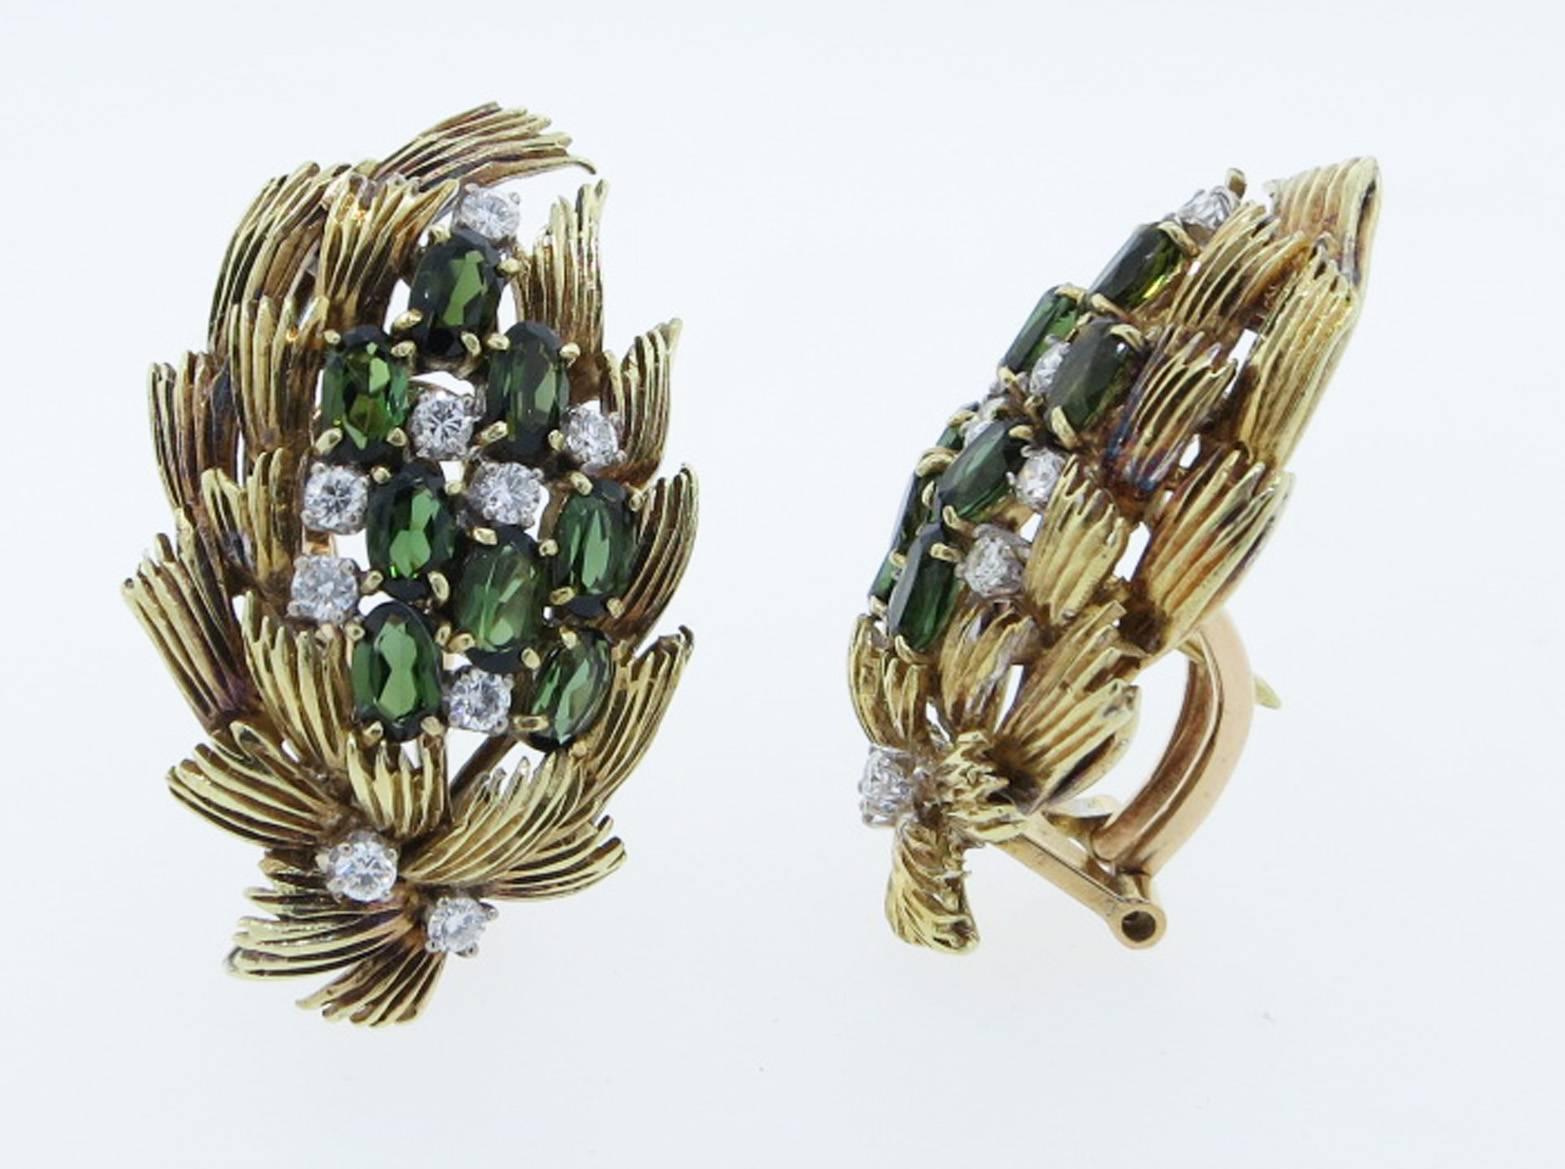 Opposing 18kt. yellow gold wheat design clip and post back earrings. Each earring is prong set with eight oval faceted natural green tourmaline sprinkled with nine round brilliant cut diamonds totaling .65 cts. The earrings measure approx 1.3 inches